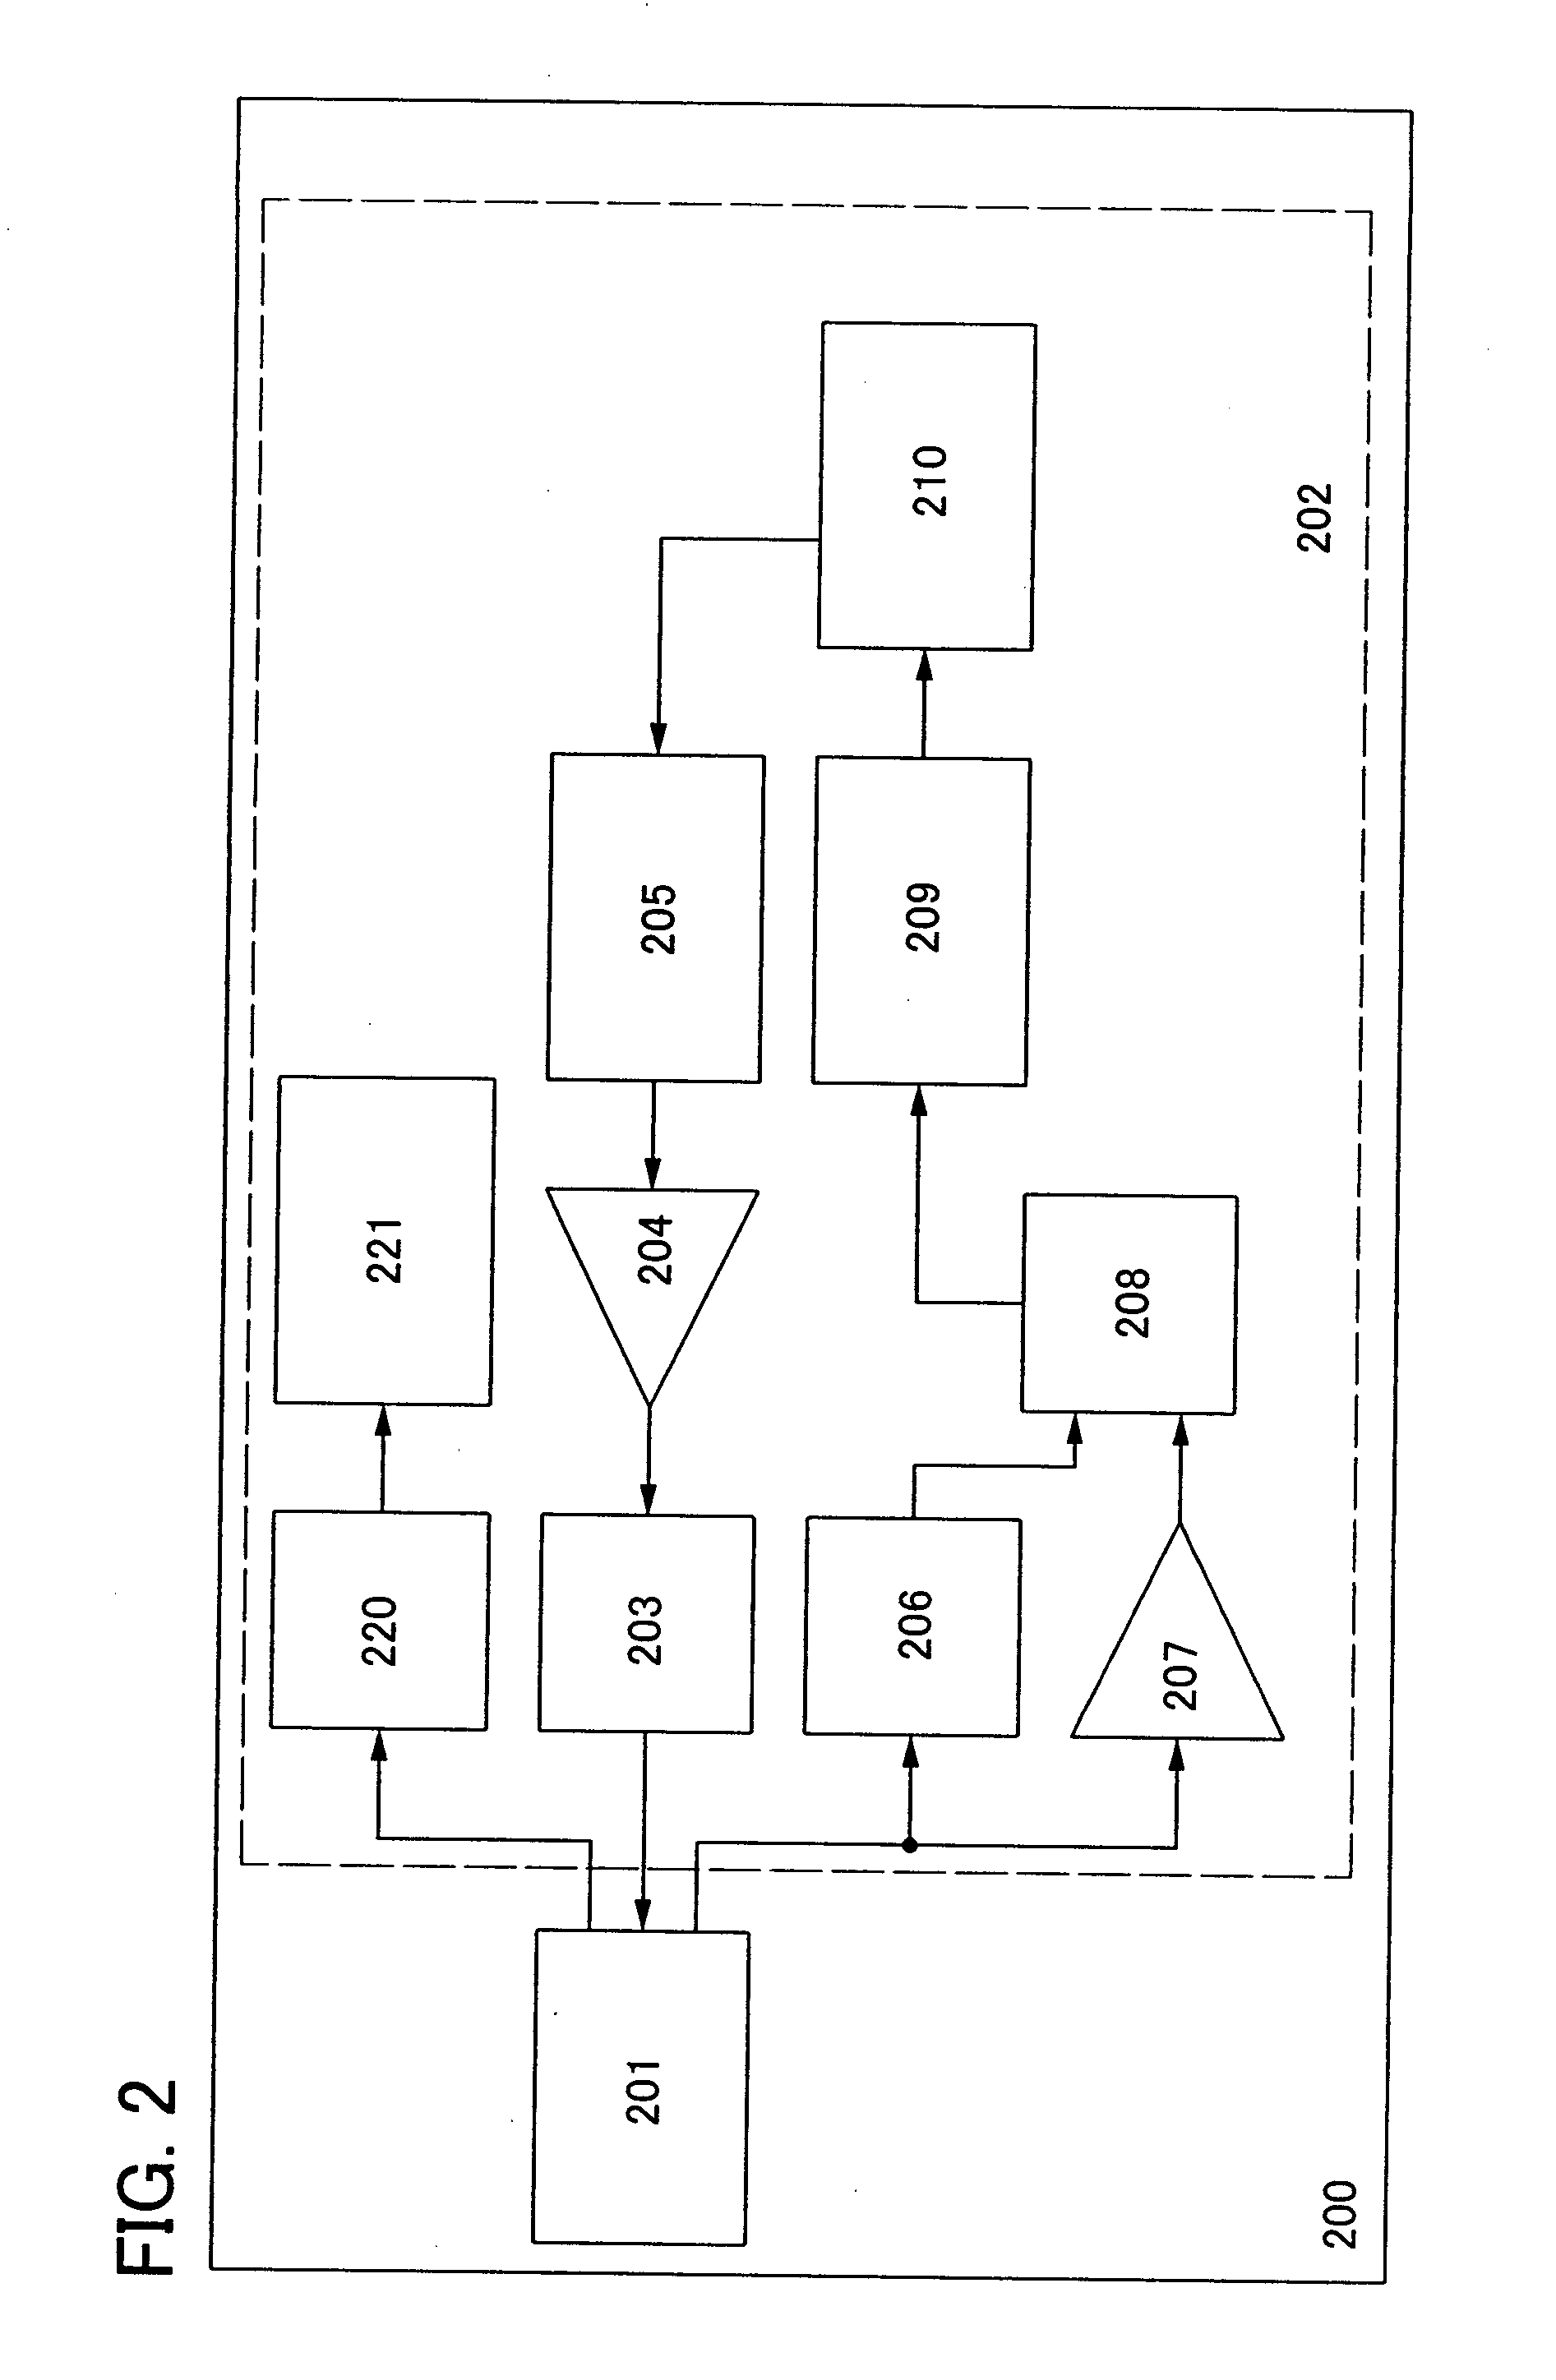 Semiconductor device and method for operating the same